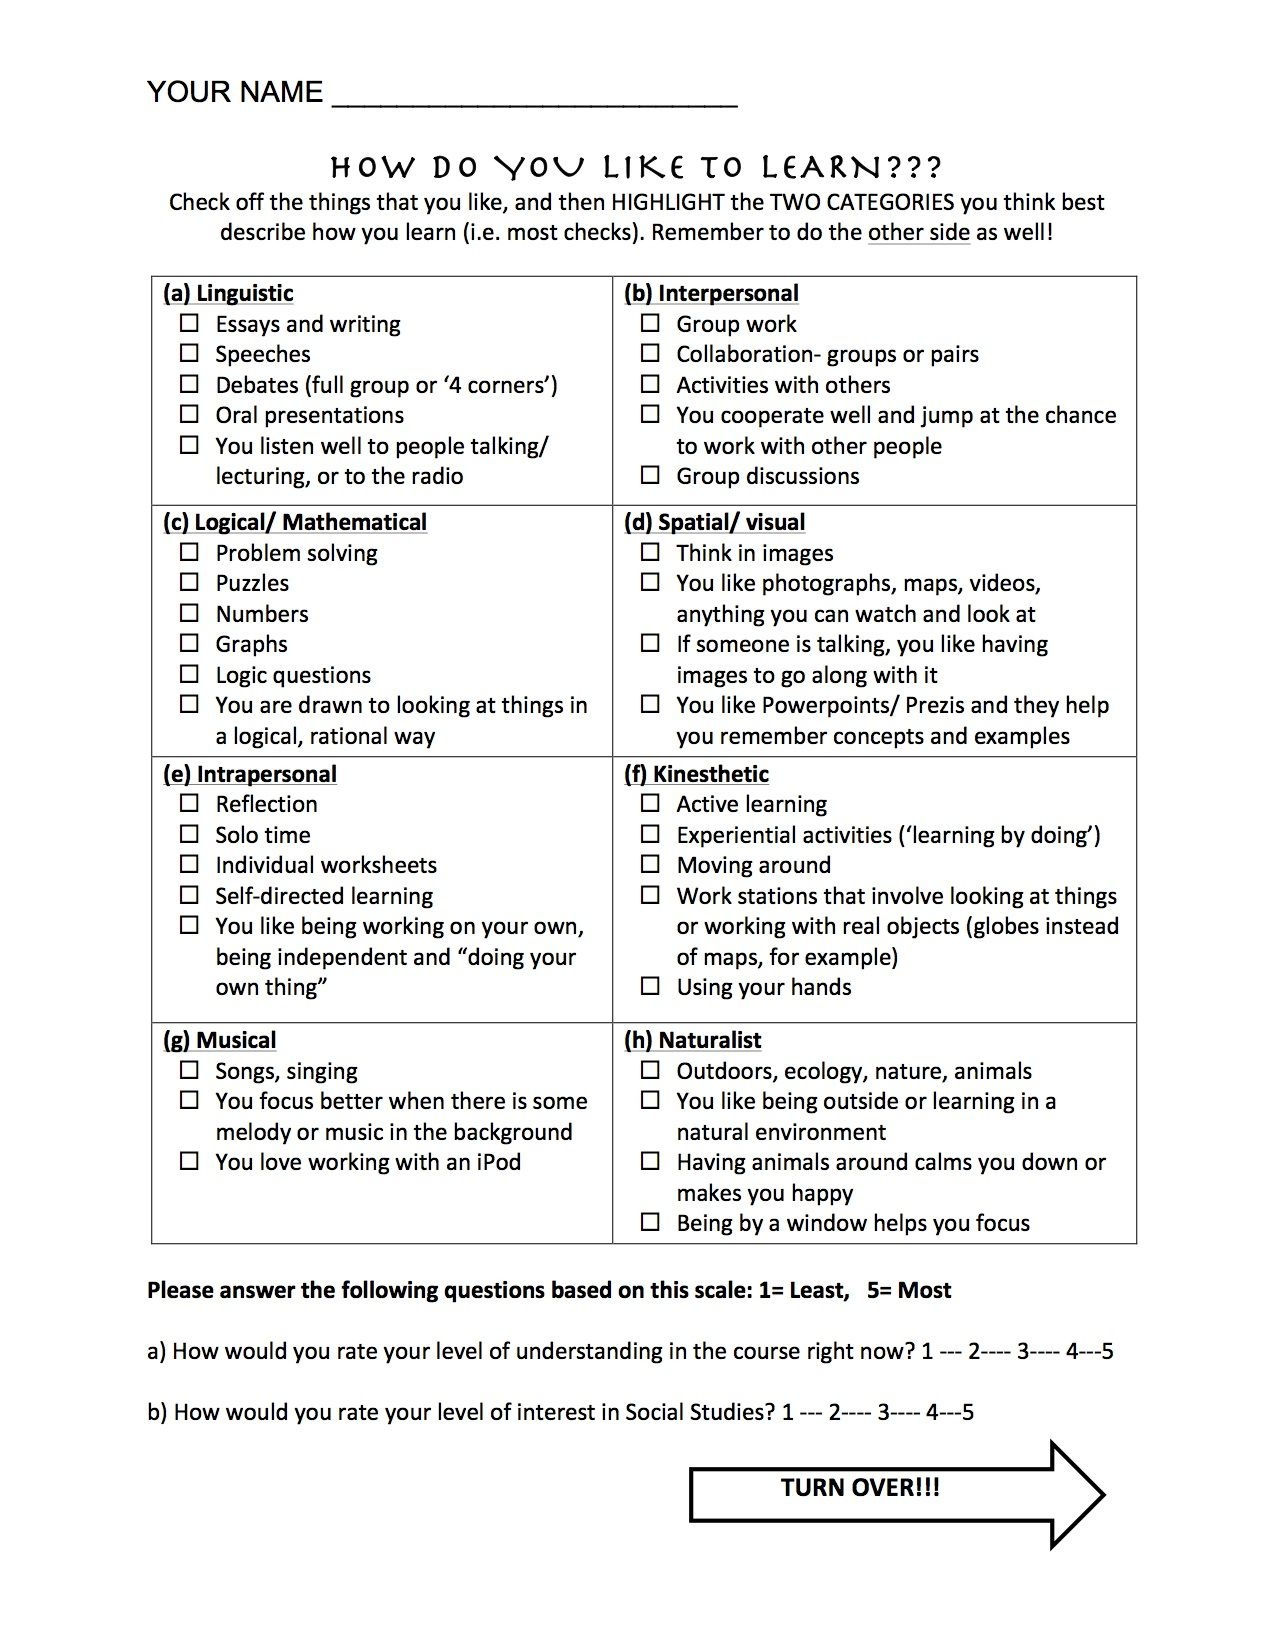 Learning Styles Questionnaire For High School- Beginning Of The Year - Free Printable Learning Styles Questionnaire